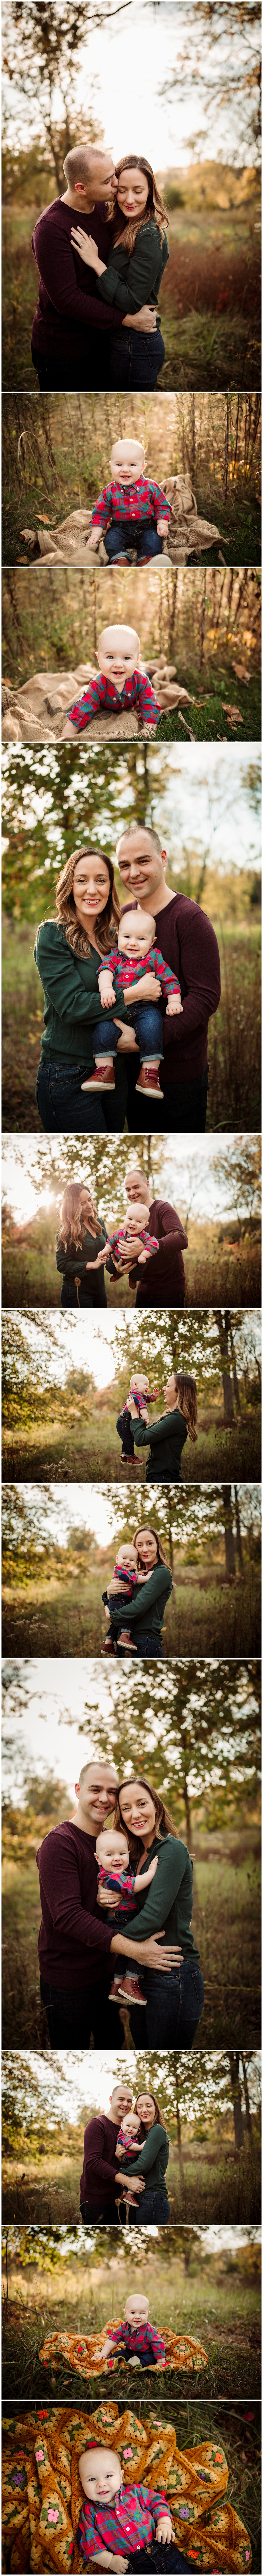 Fall Family Mini Sessions | Chicago IL Photographer | Patricia Anderson Photography